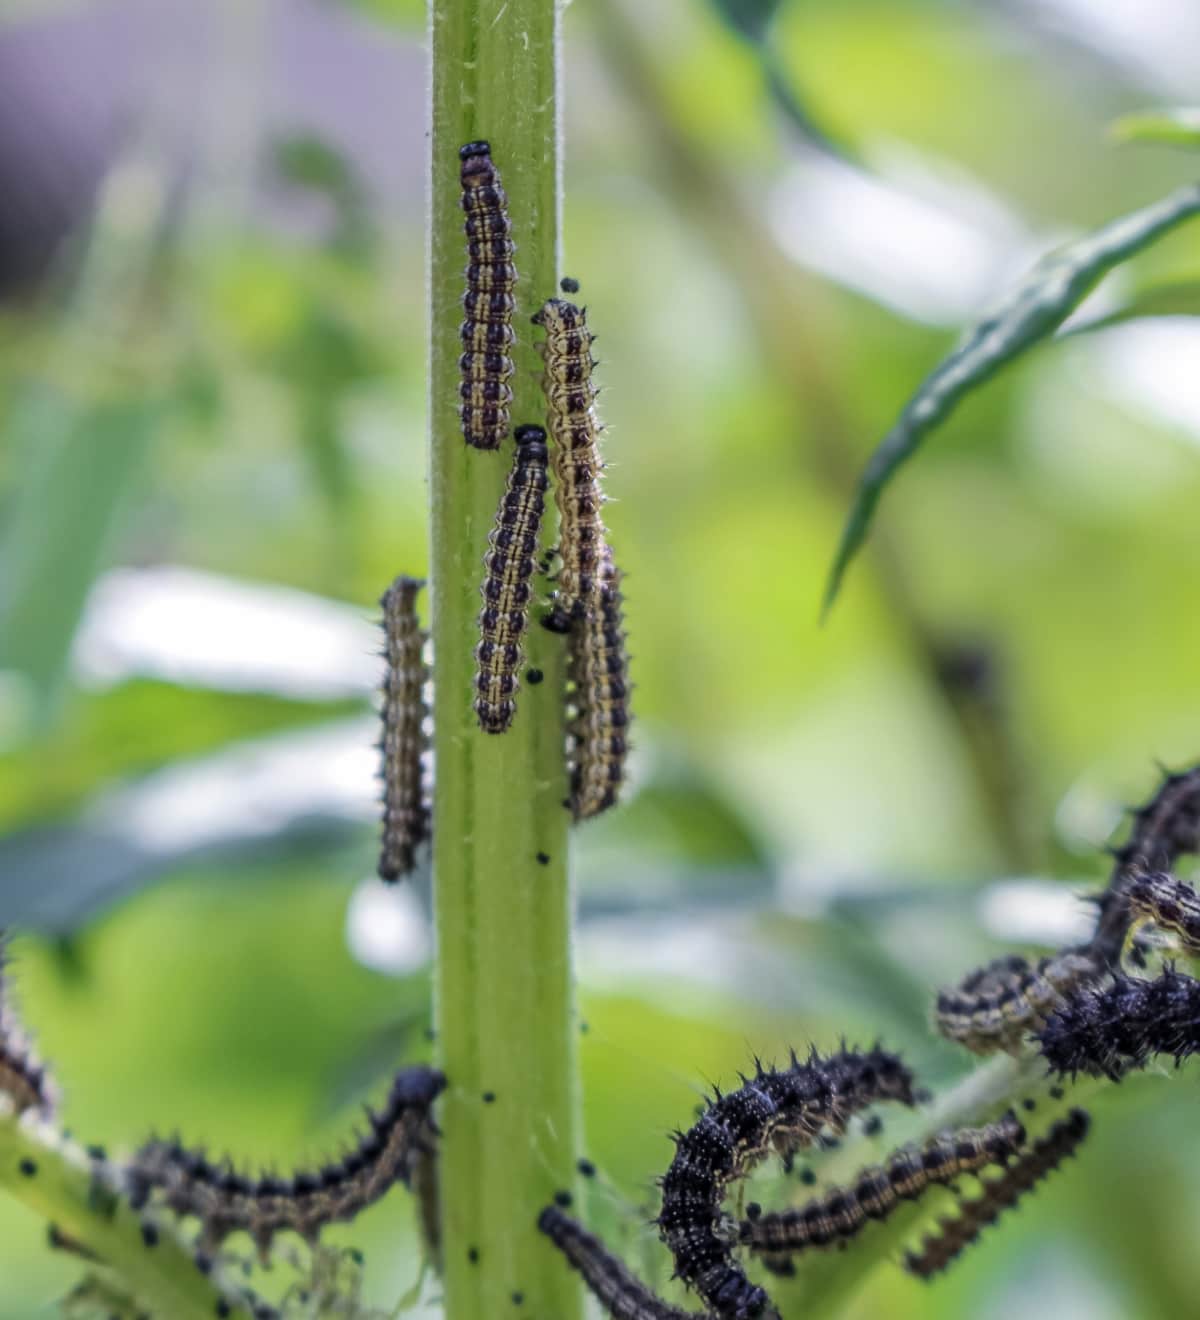 Caterpillars on A Plant